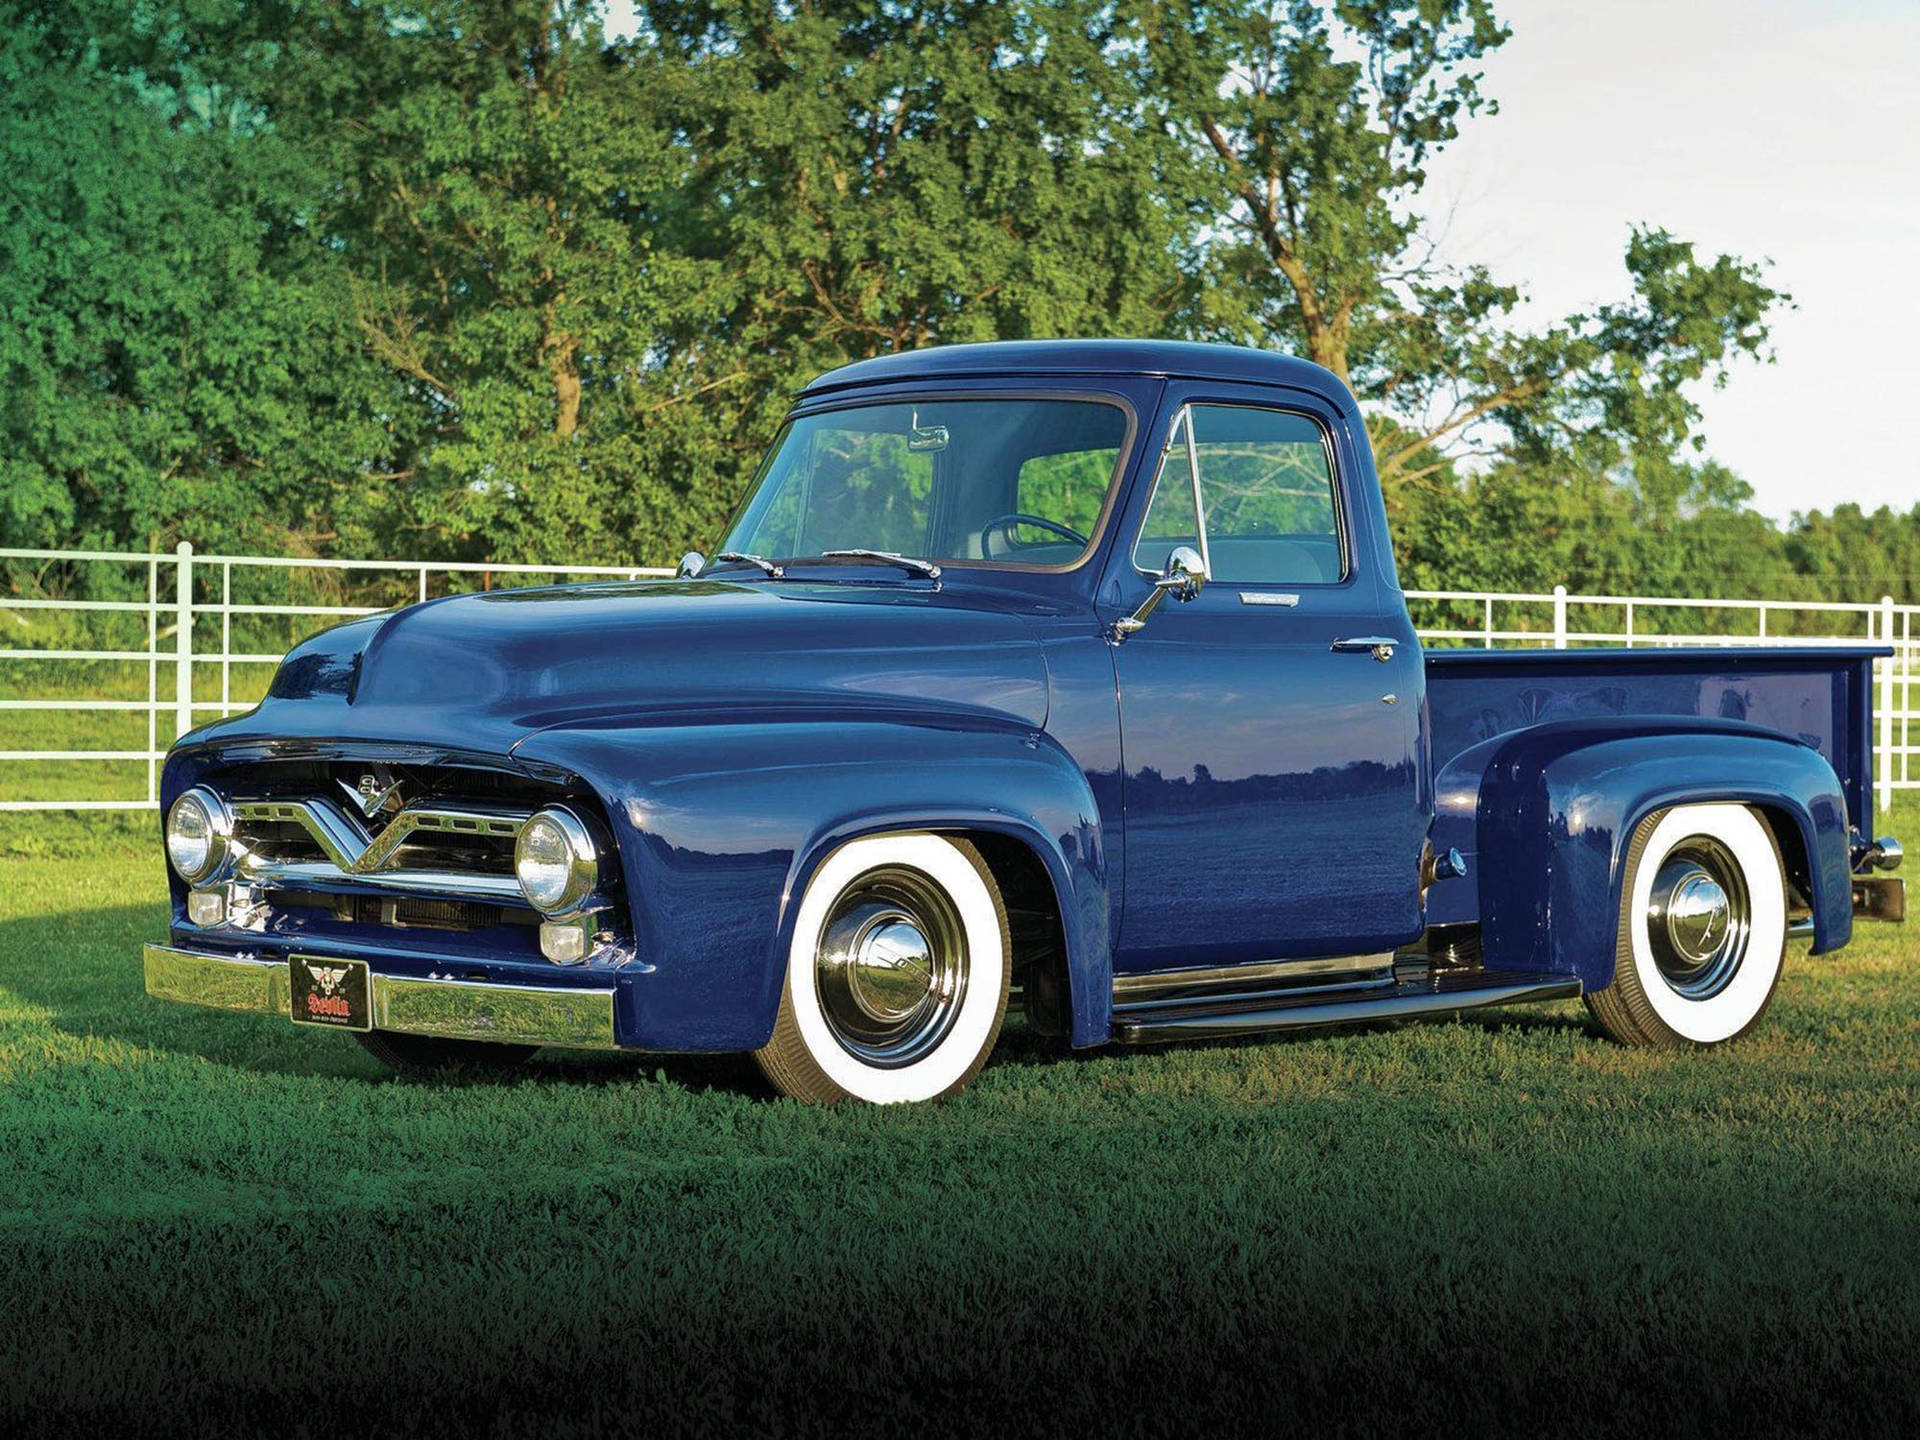 Metallic Blue Old Ford Truck Background